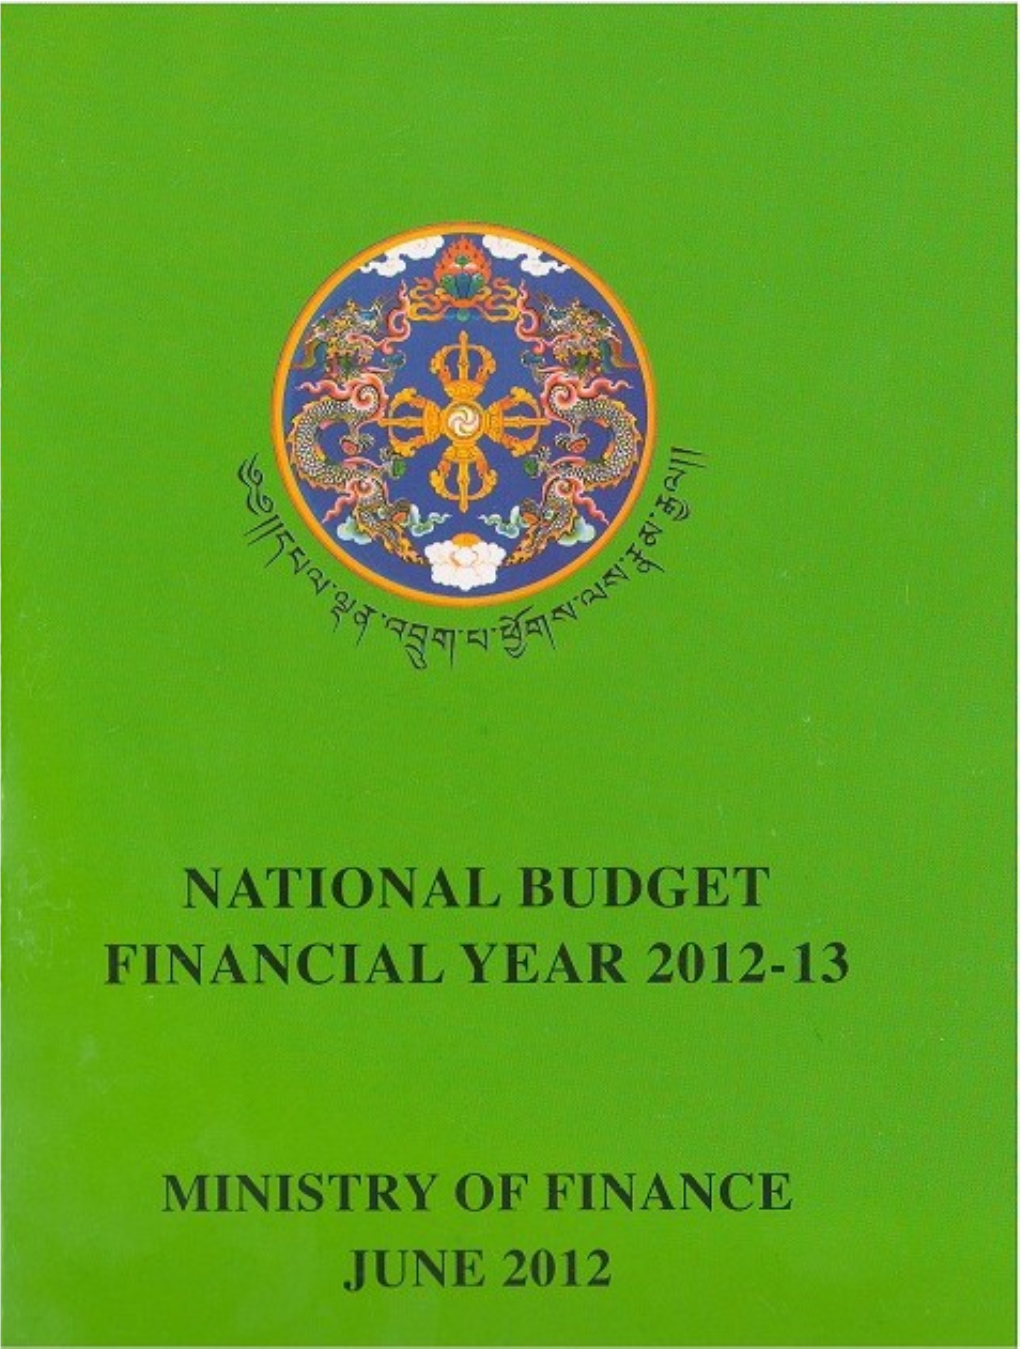 National Budget Financial Year 2012-13 Ministry of Finance June 2012